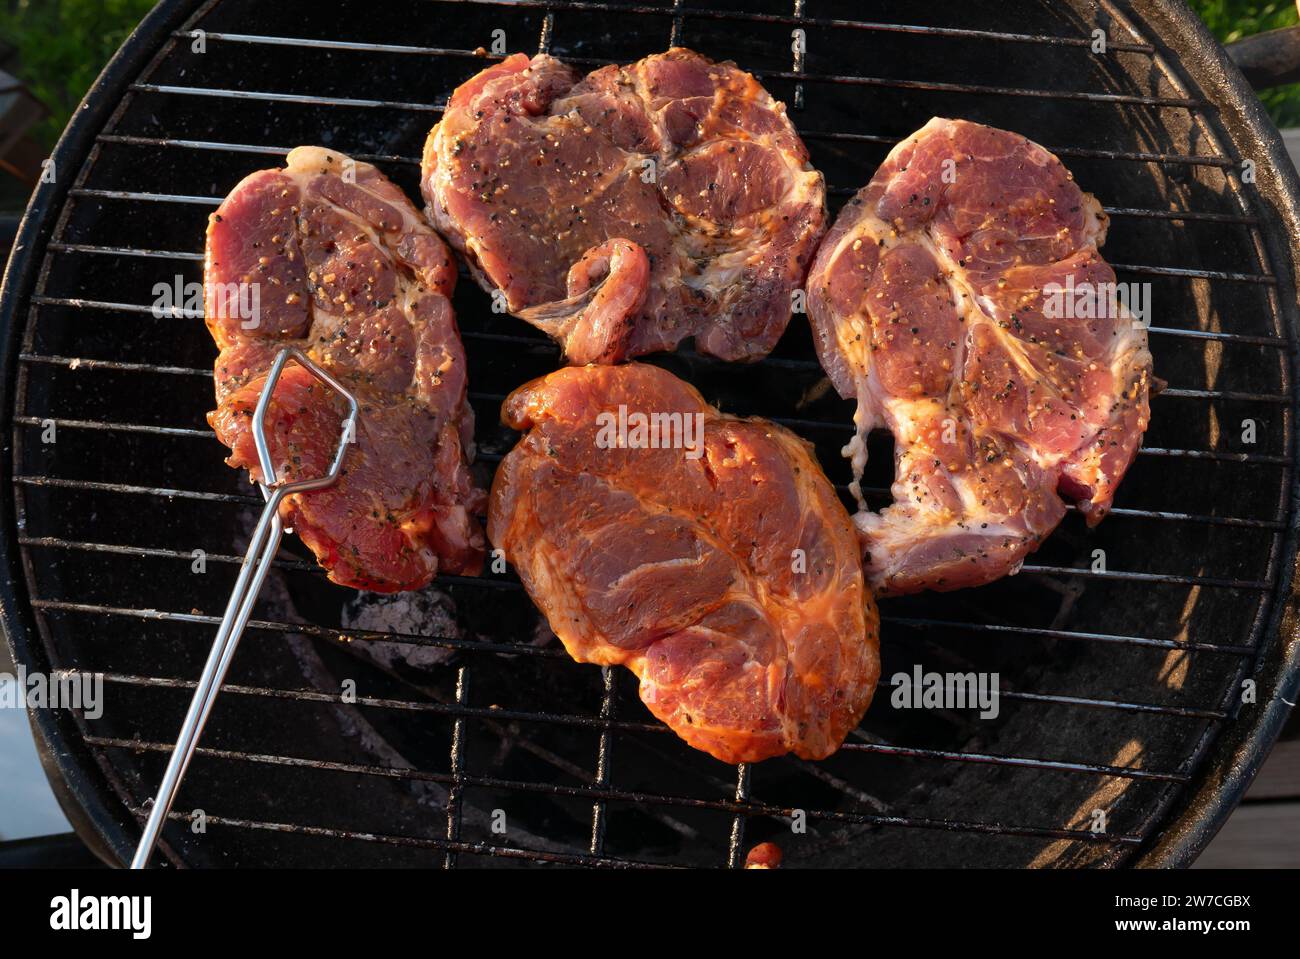 15.09.2018, Poland, Wrzesnia, Wielkopolska - Symbol photo meat and barbecue. 00A180915D272CAROEX.JPG [MODEL RELEASE: NOT APPLICABLE, PROPERTY RELEASE: Stock Photo